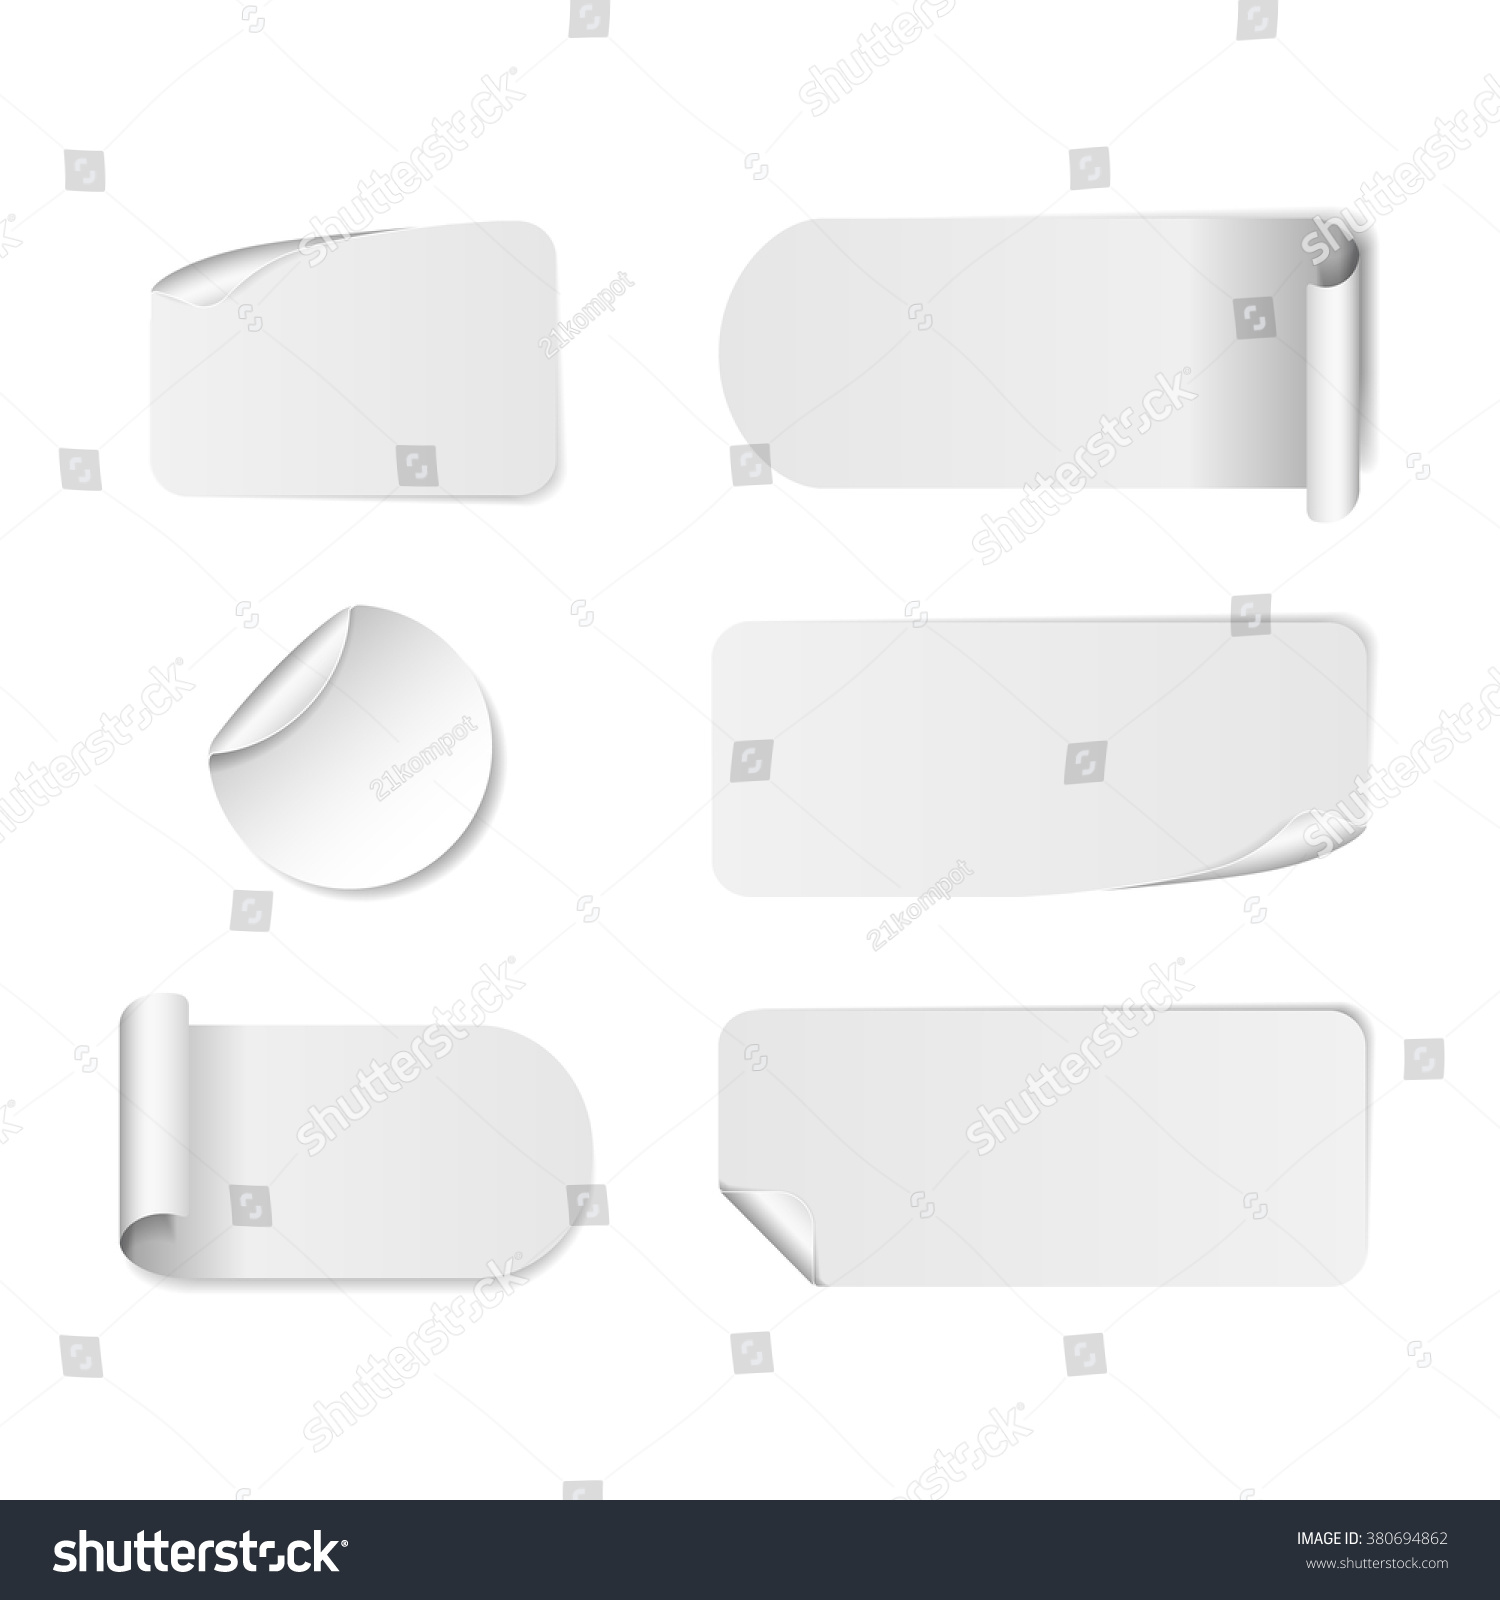 Blank white paper stickers isolated on white background. Round, square and rectangular sticker template. Sale and Clearance stickers and banners. Big Sale promotion. Blank white Sticker Templates #380694862